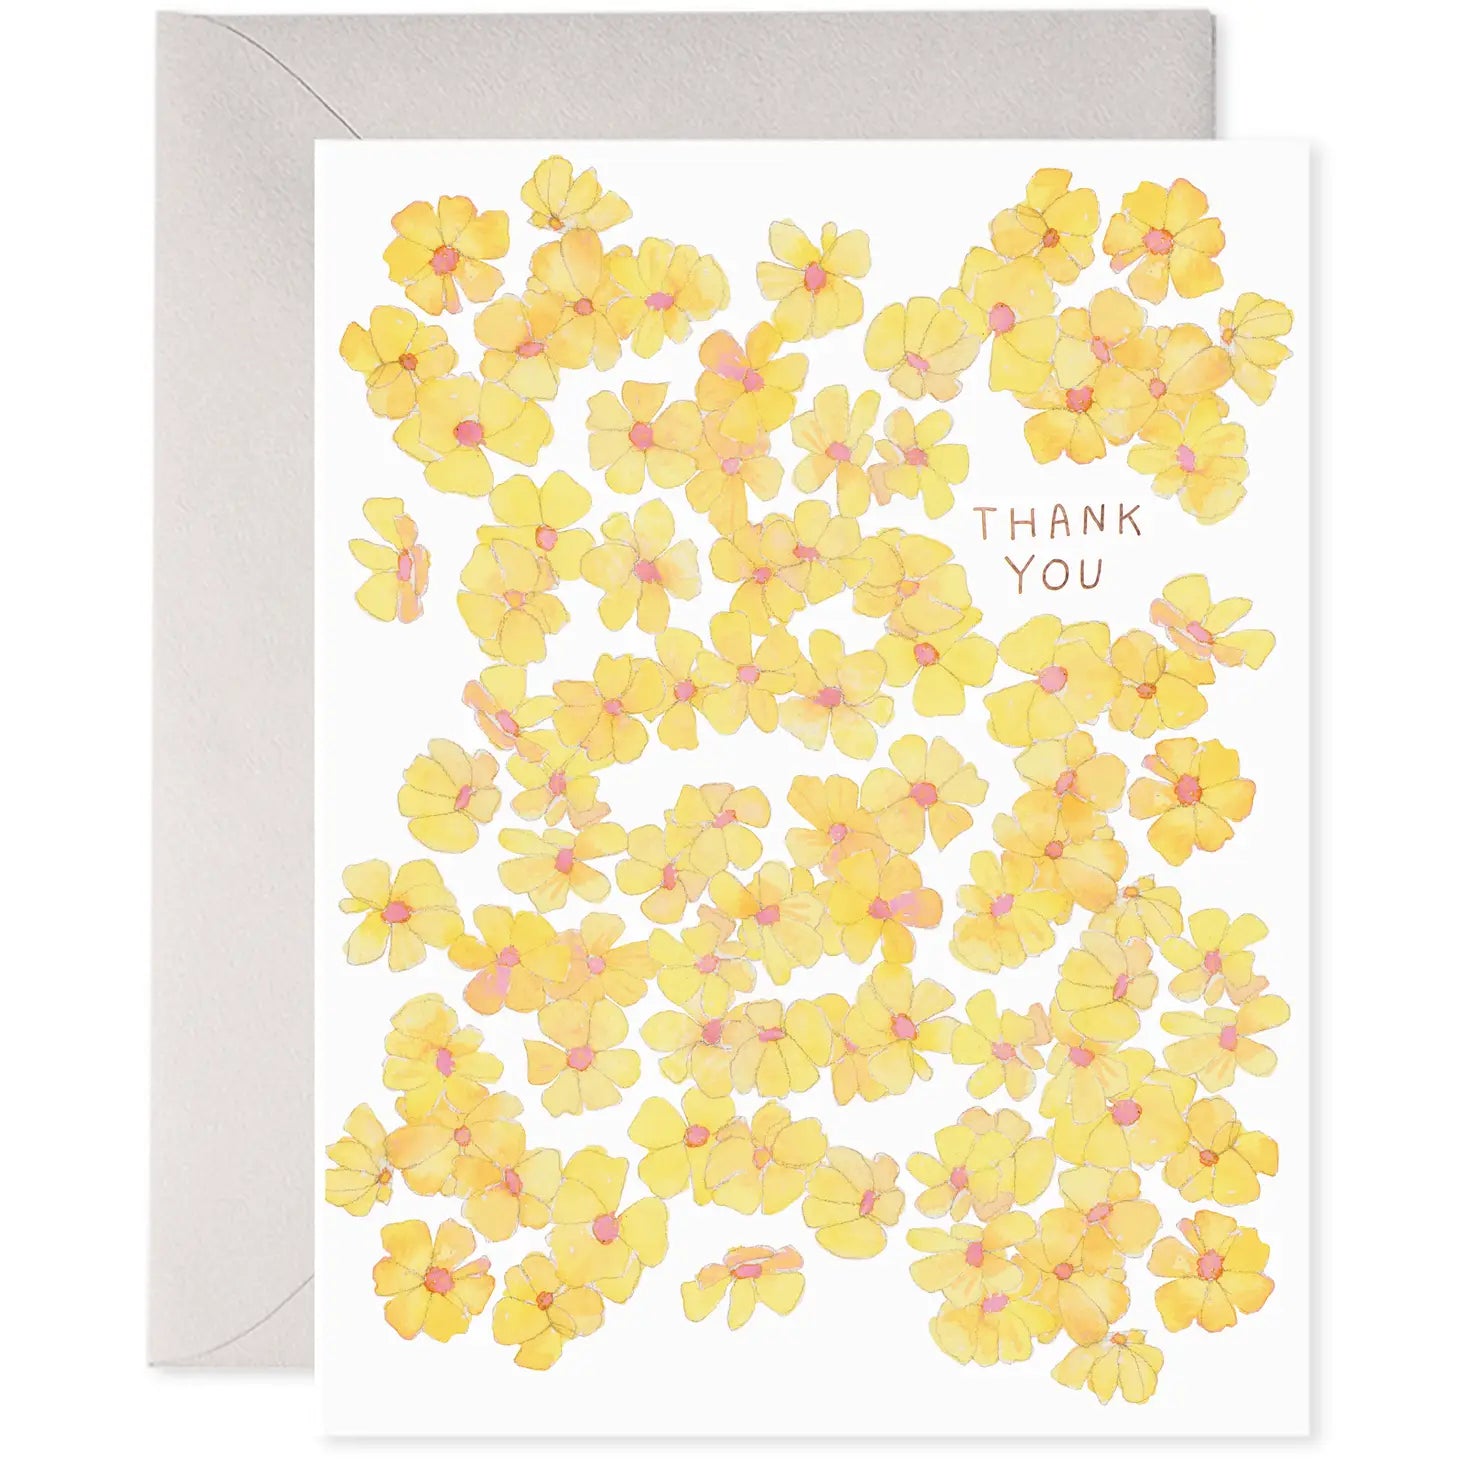 E Frances Greeting Card - Thank You Yellow Flowers